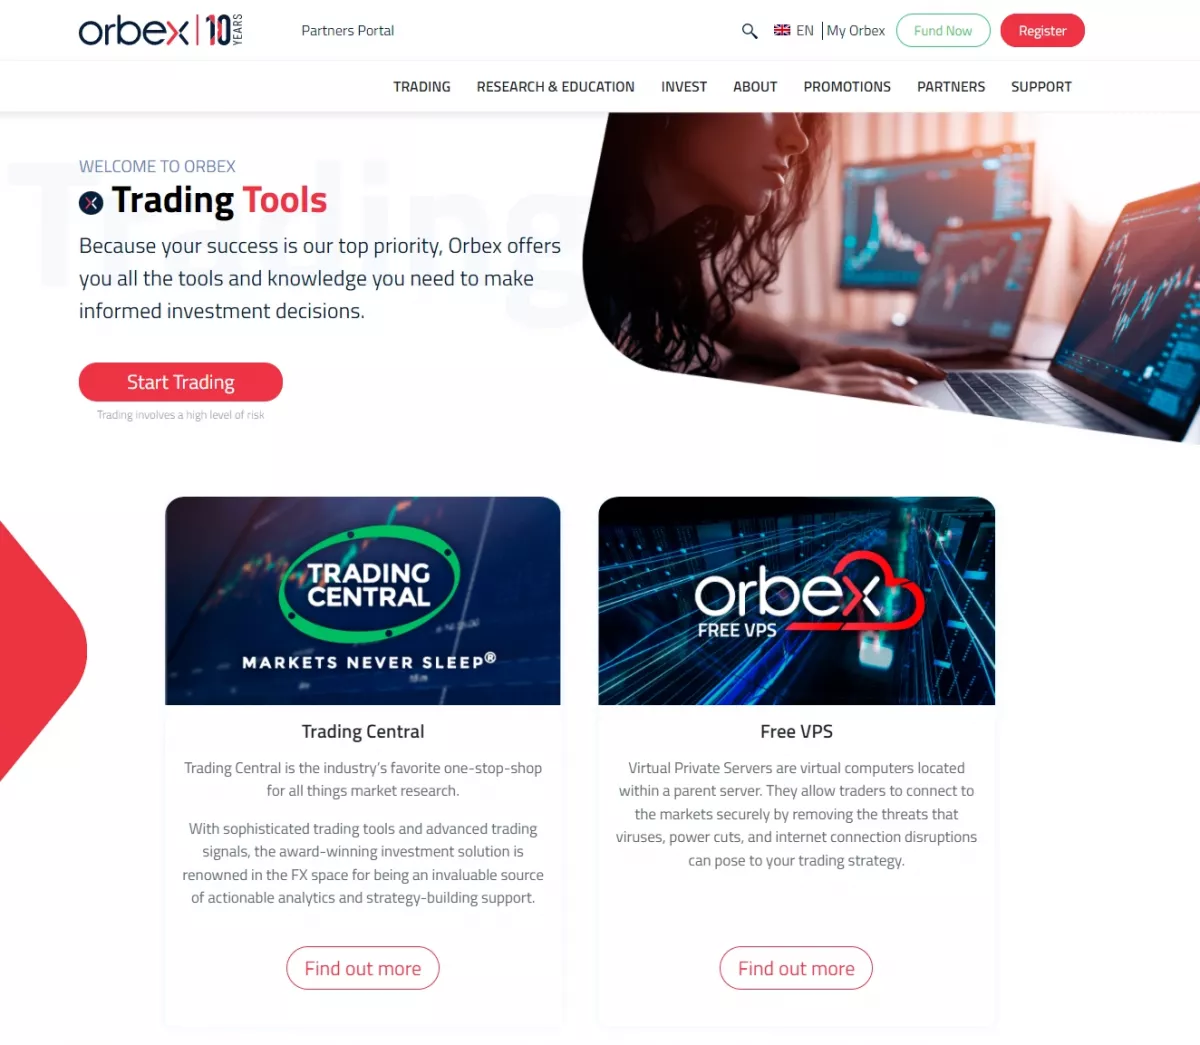 Trading tools offered by the broker Orbex